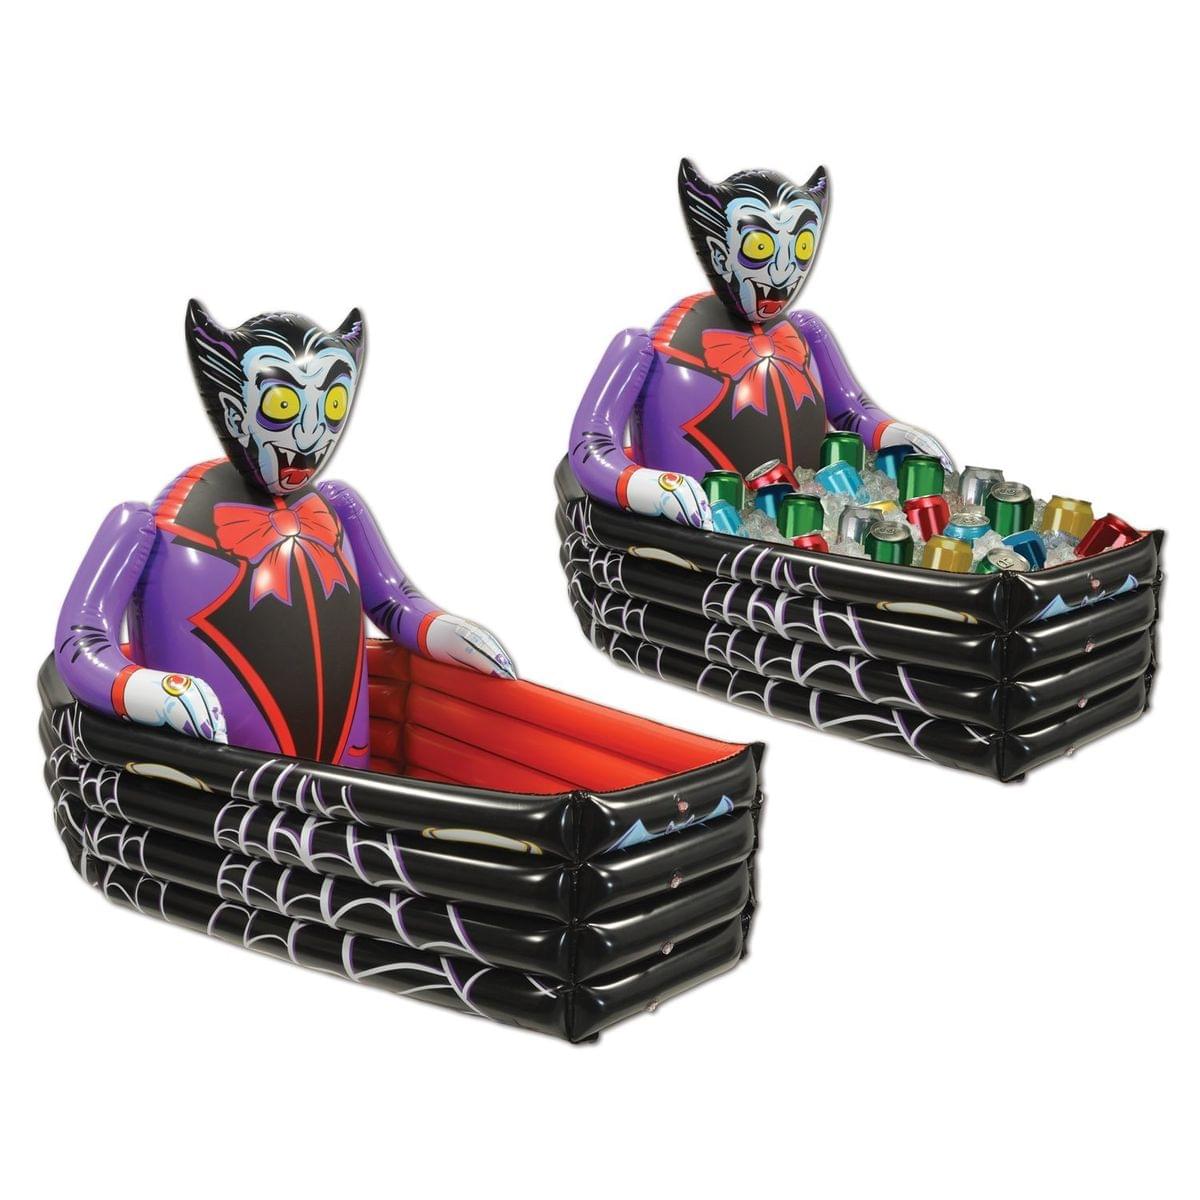 Inflate Vampire Coffin Cooler